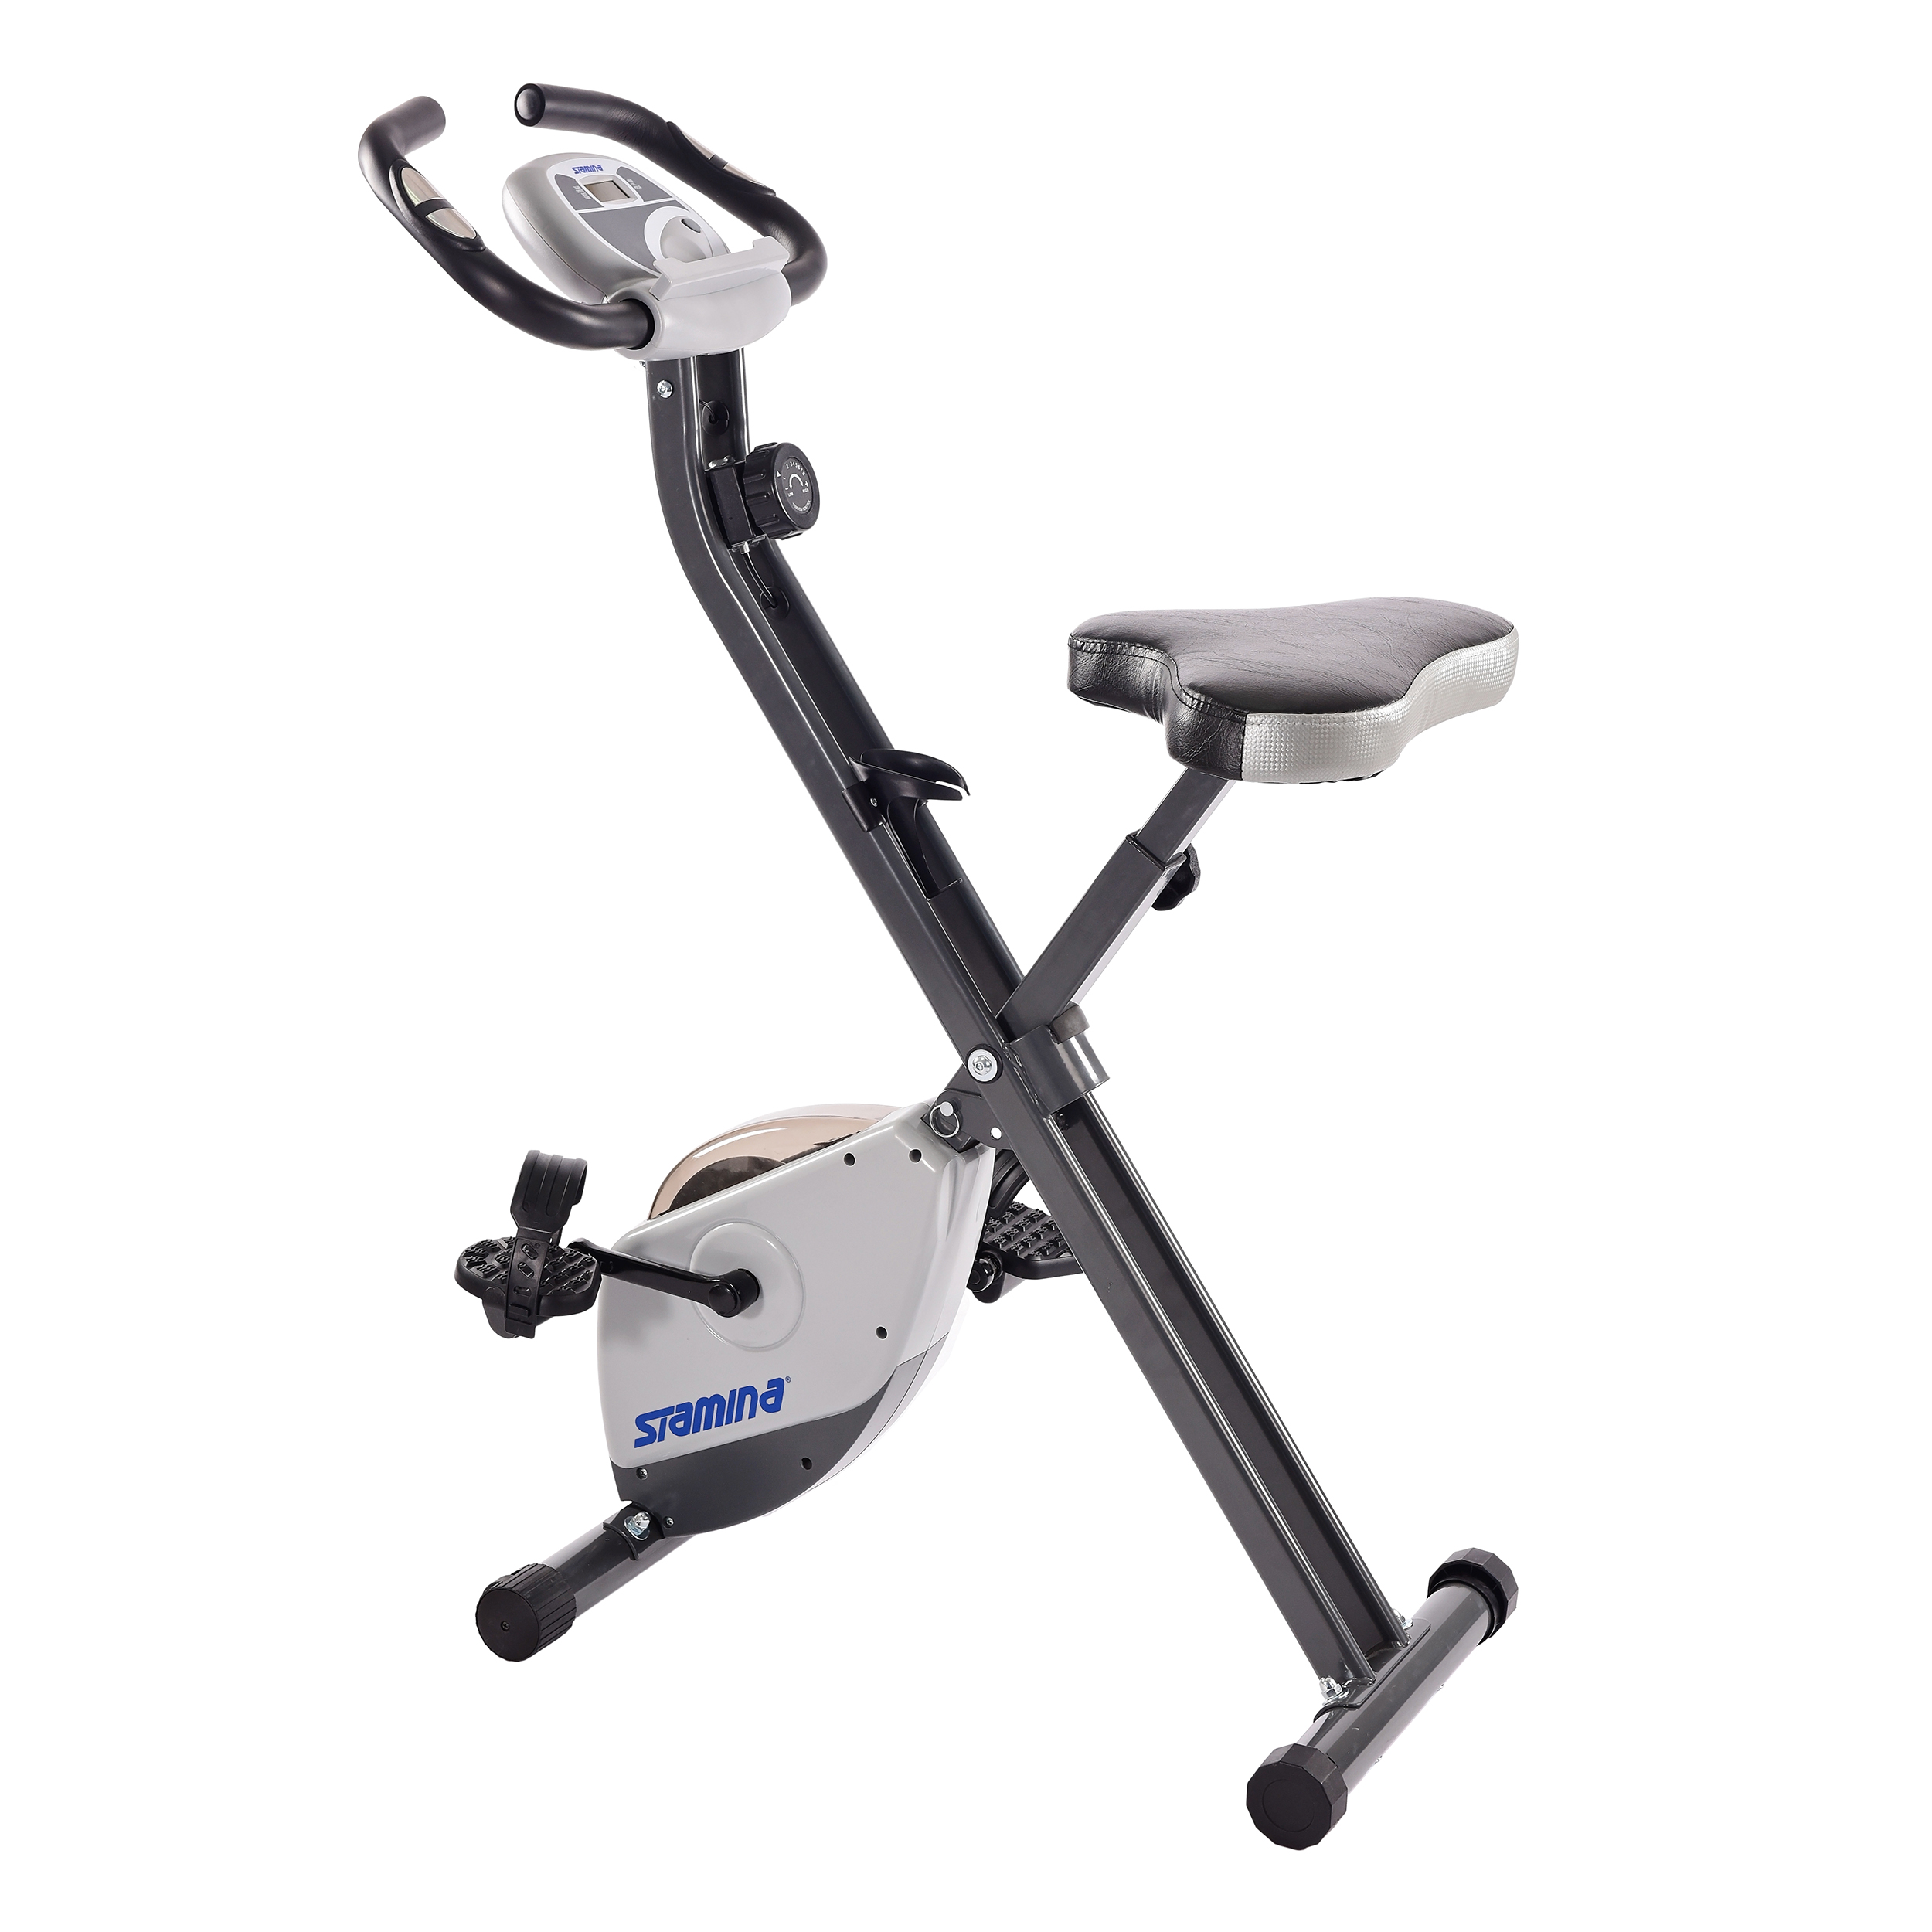 Stamina Folding Cardio Upright Exercise Bike with Heart Rate Sensors and Extra Wide Padded Seat - image 1 of 8